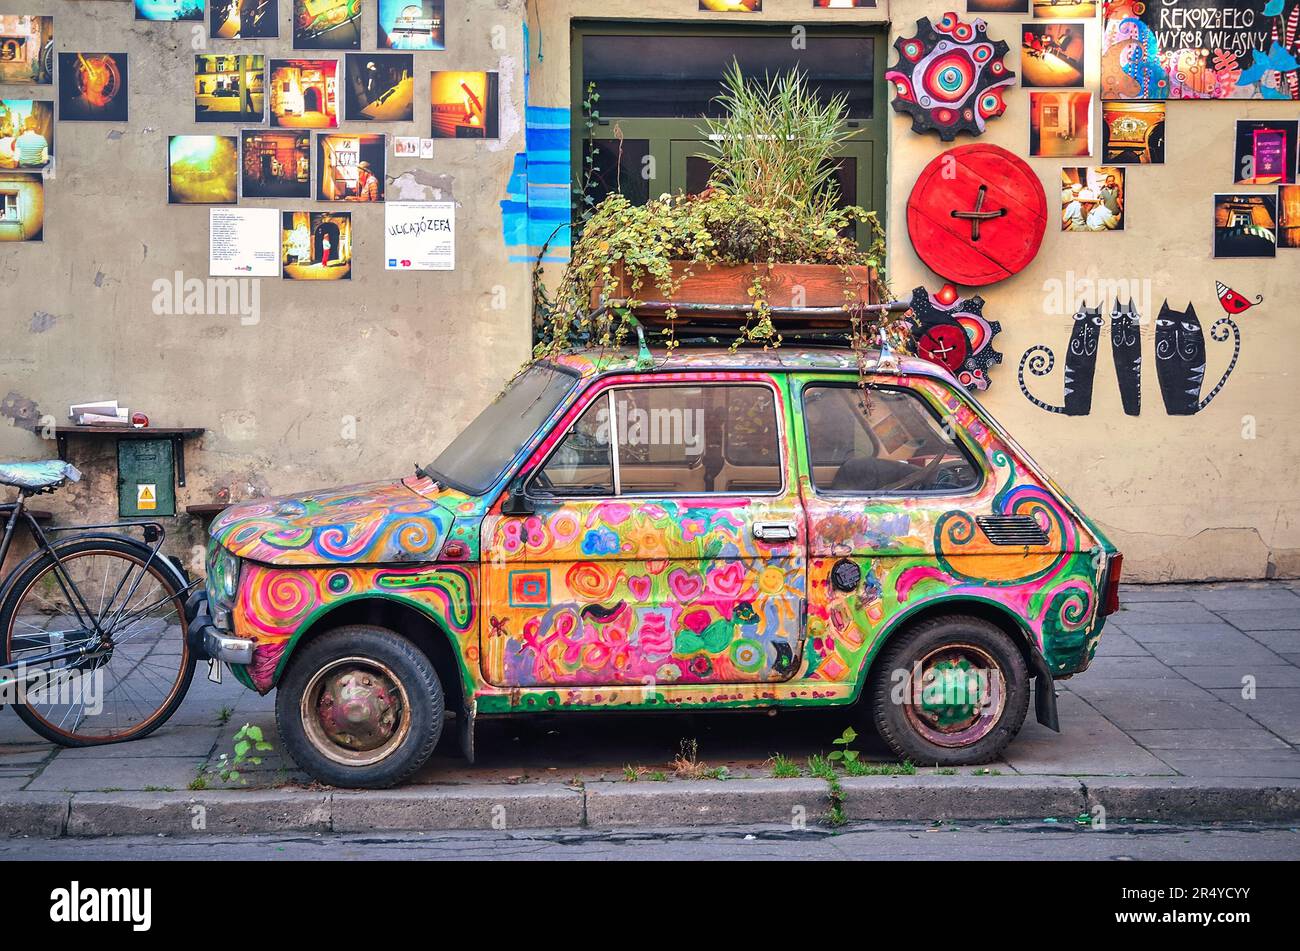 Krakow, Poland - October 21, 2012: Old Polish car Fiat 126 placed as a exhibit of local manufacture. Colorful car is part of the gallery, located on t Stock Photo